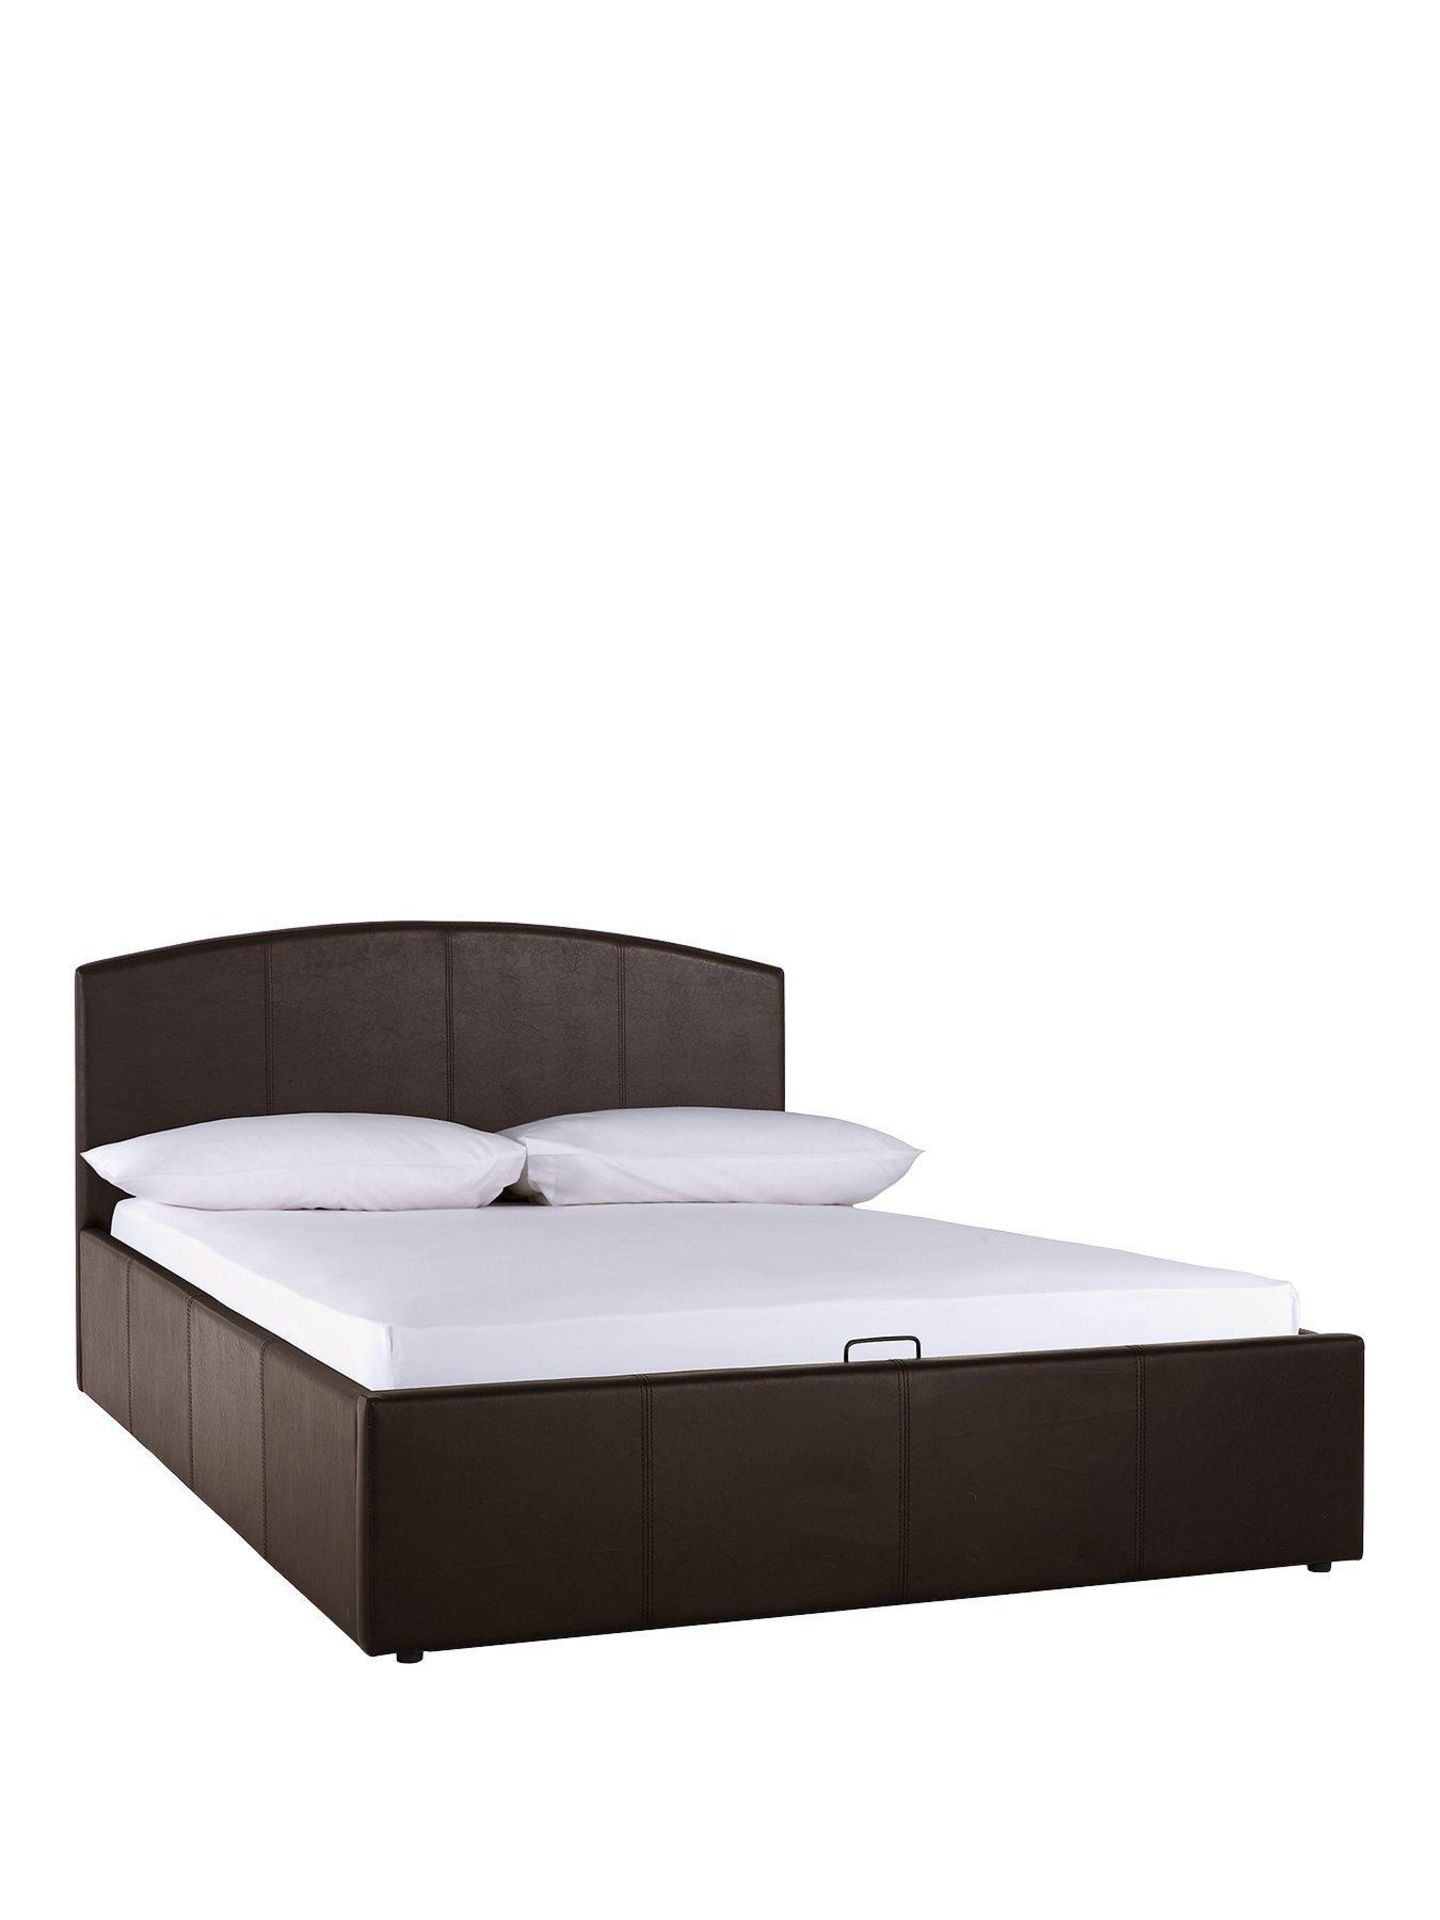 Boxed Item Marston Double Lift-Up Bed [Charcoal] 88X144X202Cm Rrp:£514.0 - Image 2 of 2